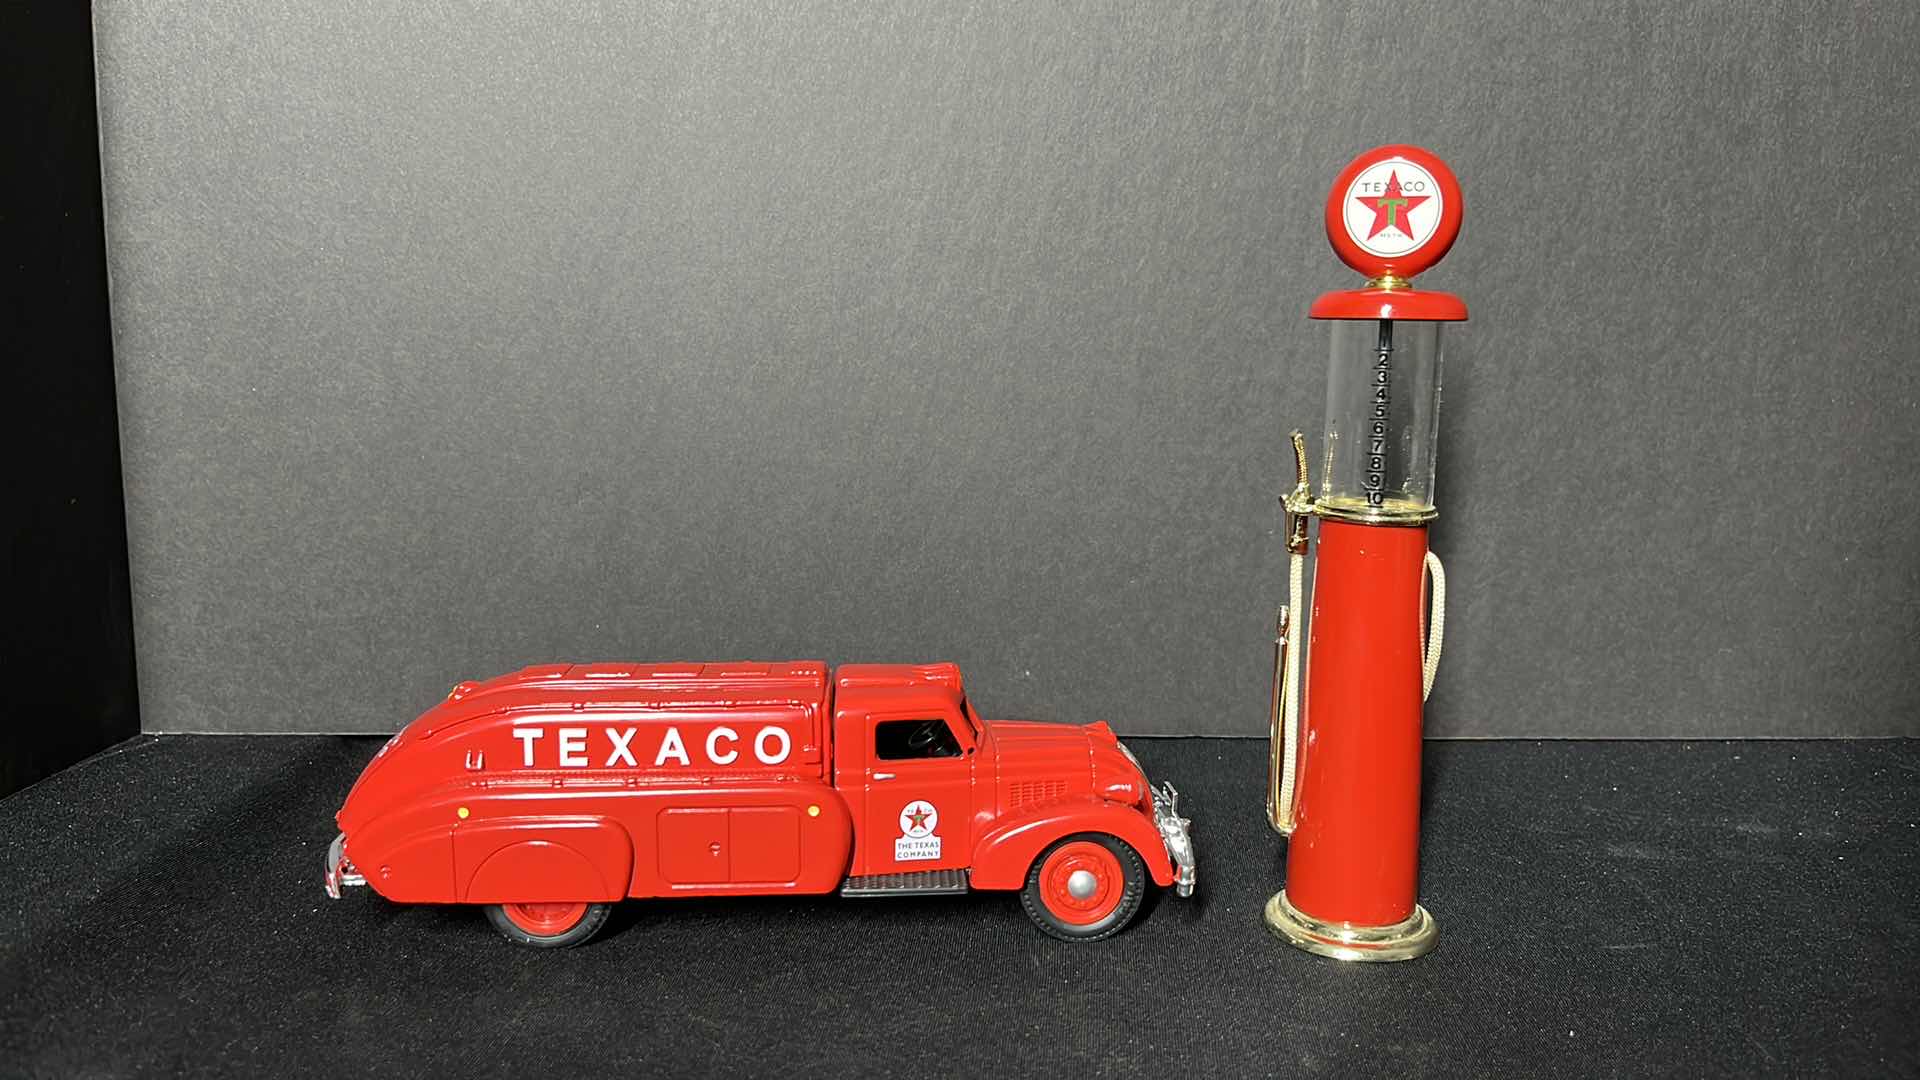 Photo 1 of ERTL COLLECTIBLES, 1997 TEXACO HENRY FORD MUSEUM & GREENFIELD VILLAGE DIE-CAST REPLICA 1939 DODGE AIRFLOW AND VINTAGE MINIATURE GAS CYLINDER PUMP 7.5”
$25
$15